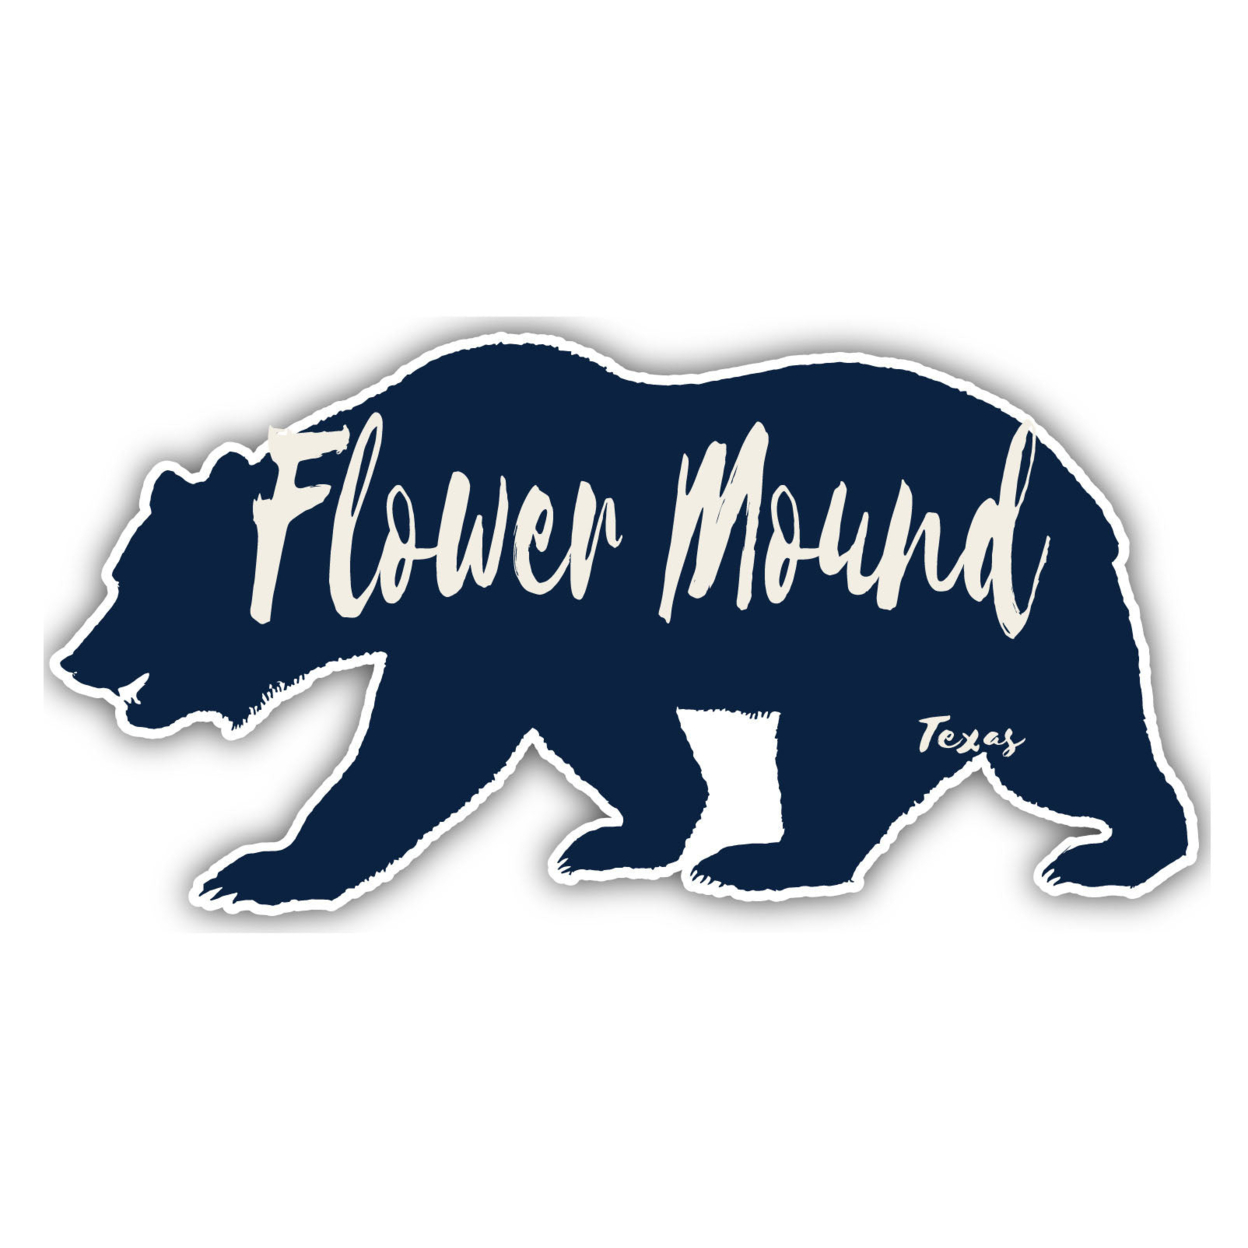 Flower Mound Texas Souvenir Decorative Stickers (Choose Theme And Size) - 4-Pack, 4-Inch, Bear